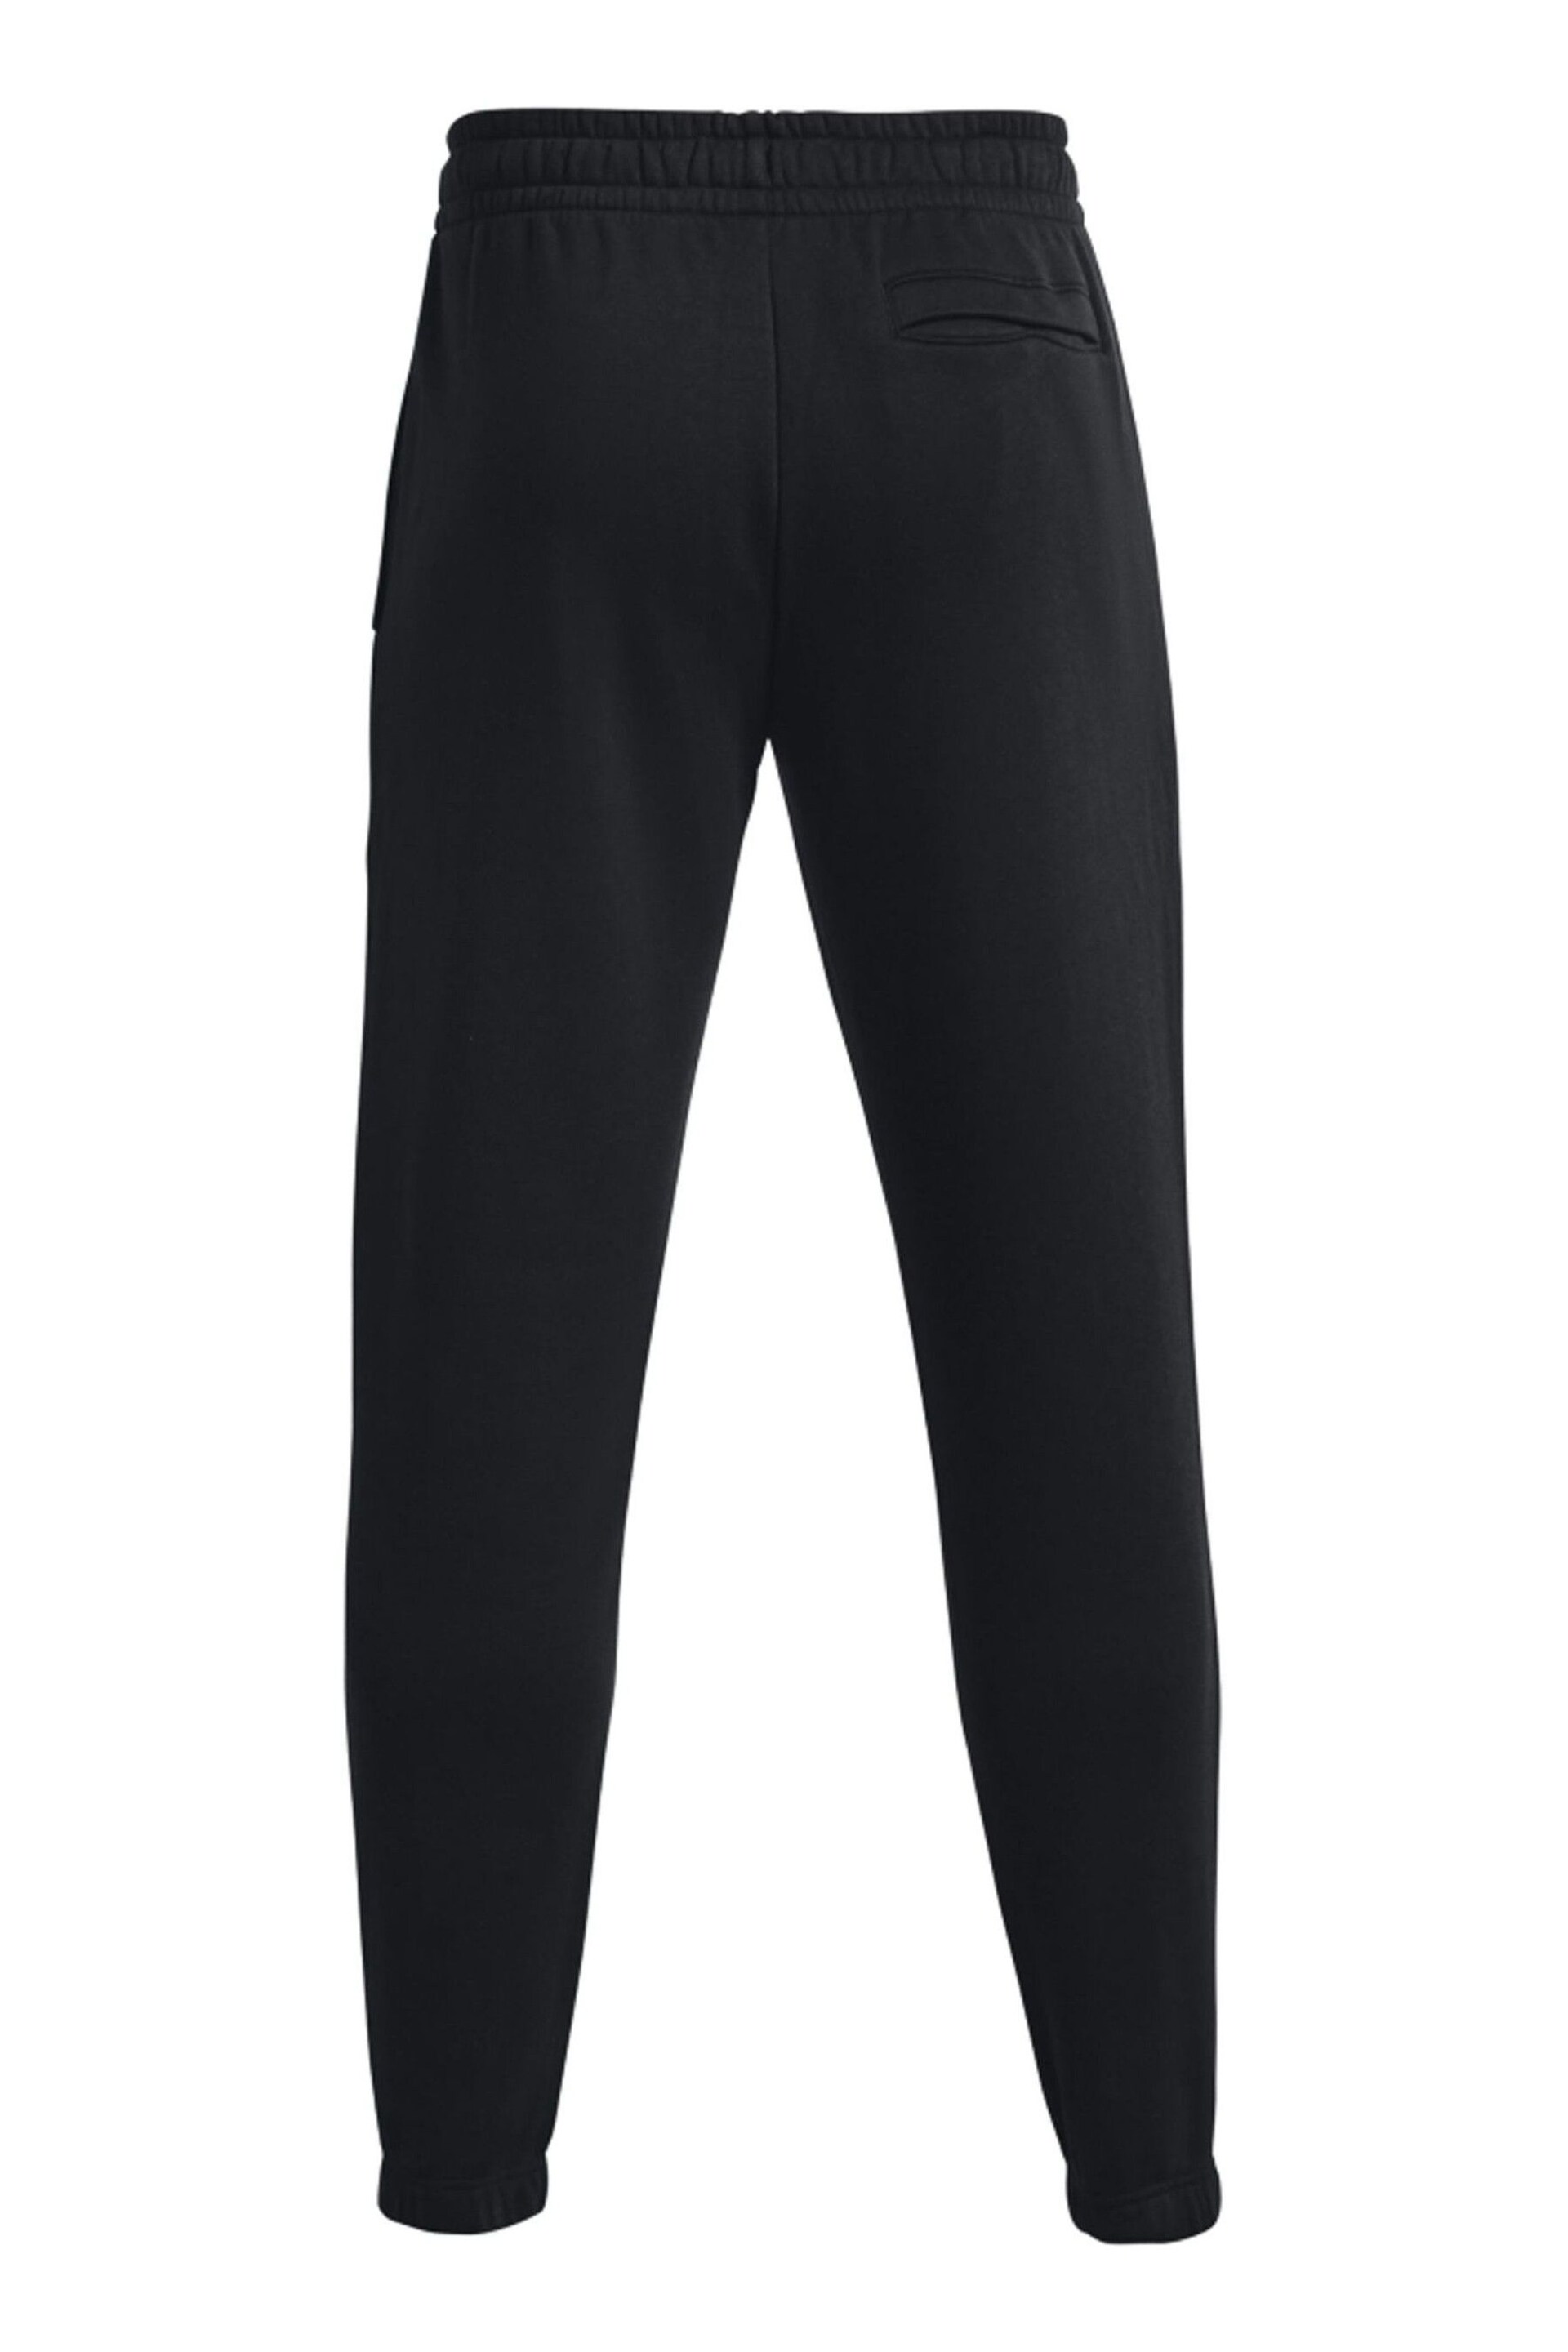 Under Armour Black Essential Joggers - Image 6 of 6